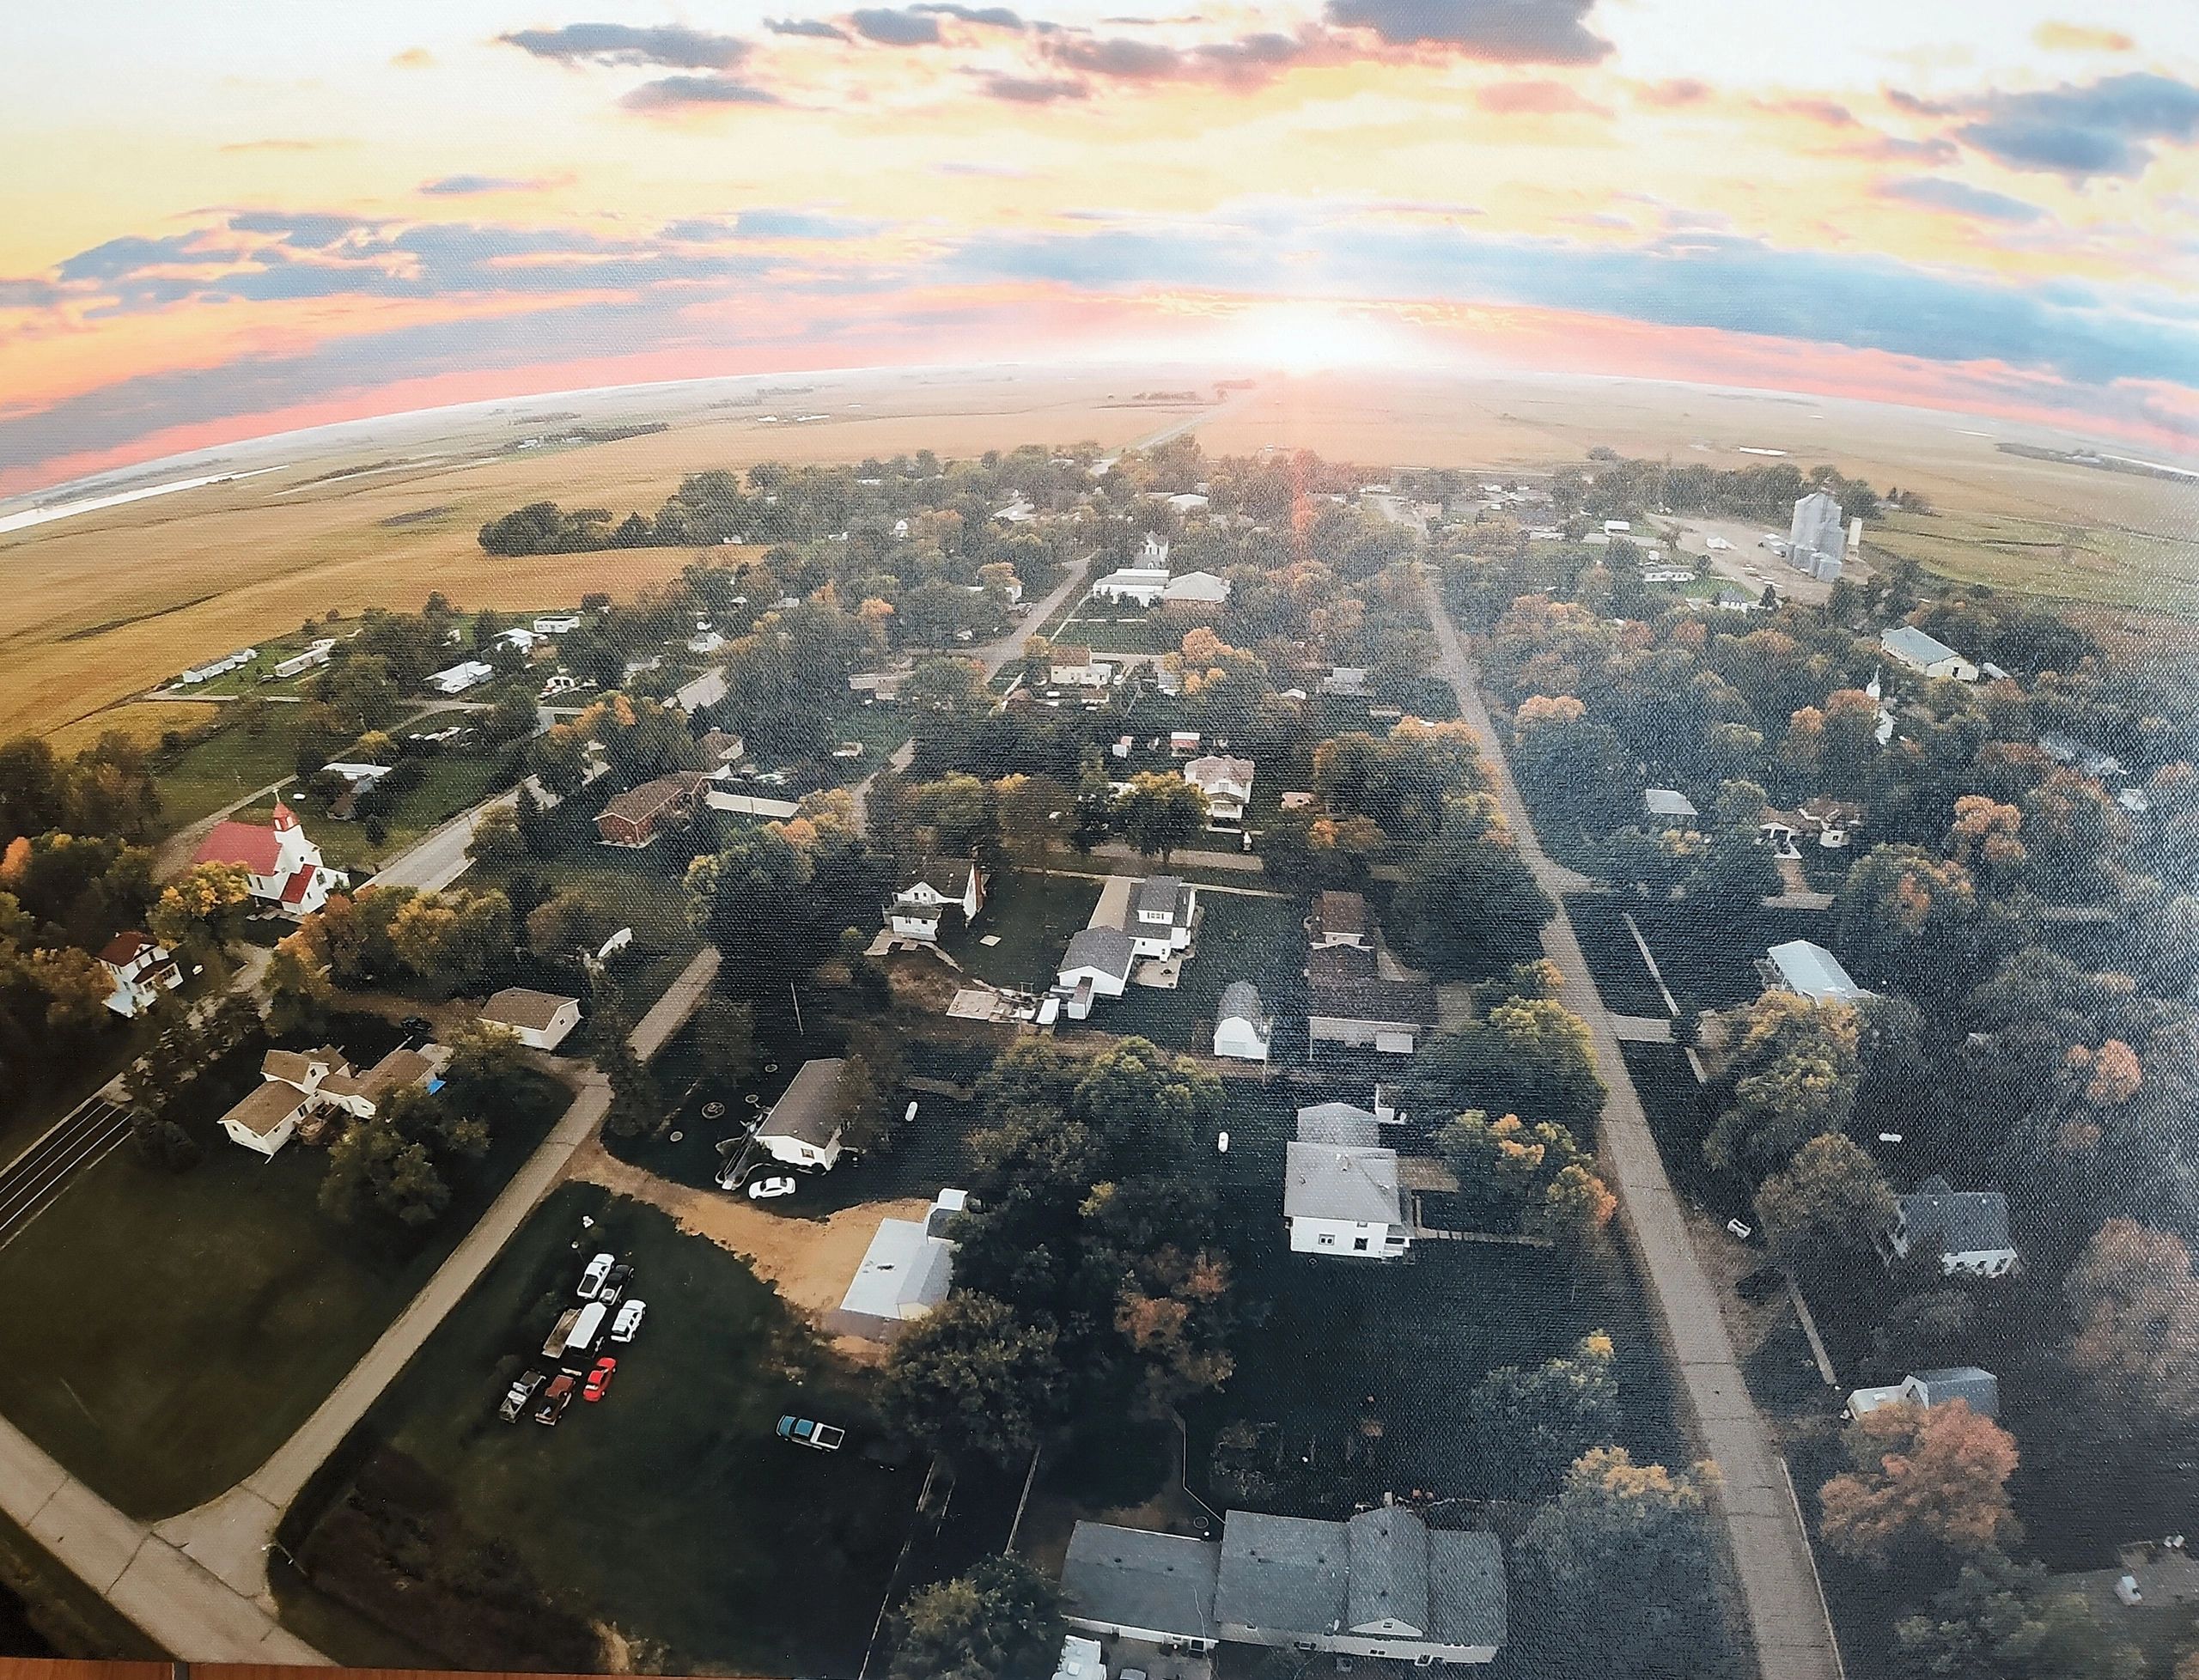 Sunset Over Henry
Drone Photography by Jeremy Cable